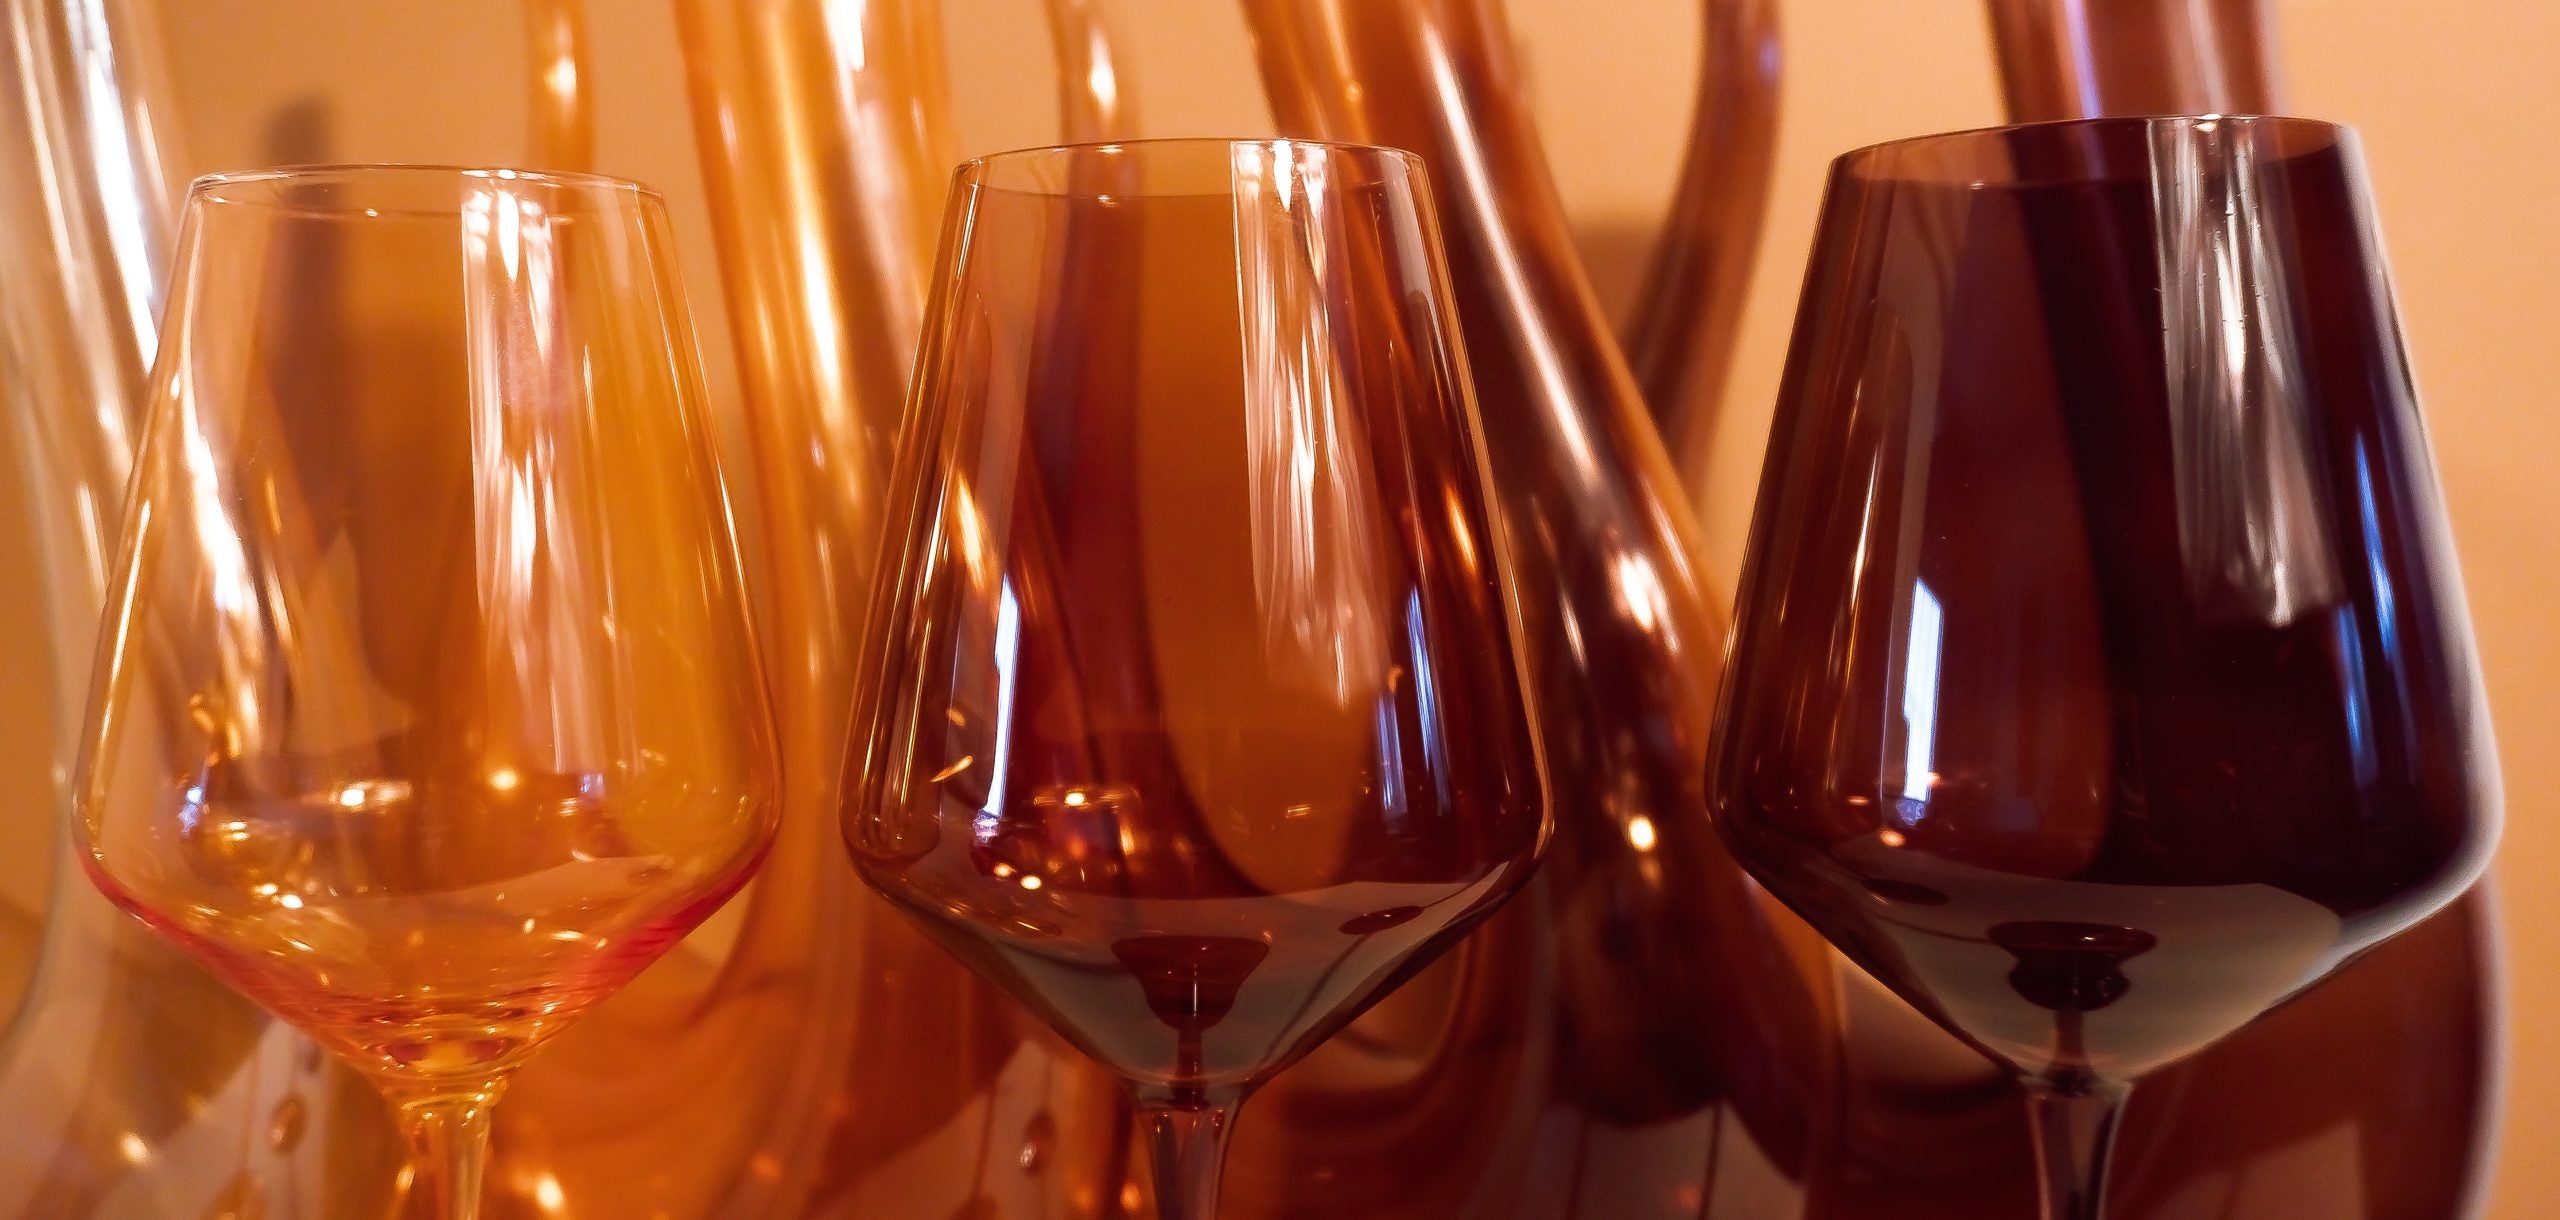 Let’s Toast: This Is The Melanated Glassware You Didn’t Know You Needed In Your Cabinet